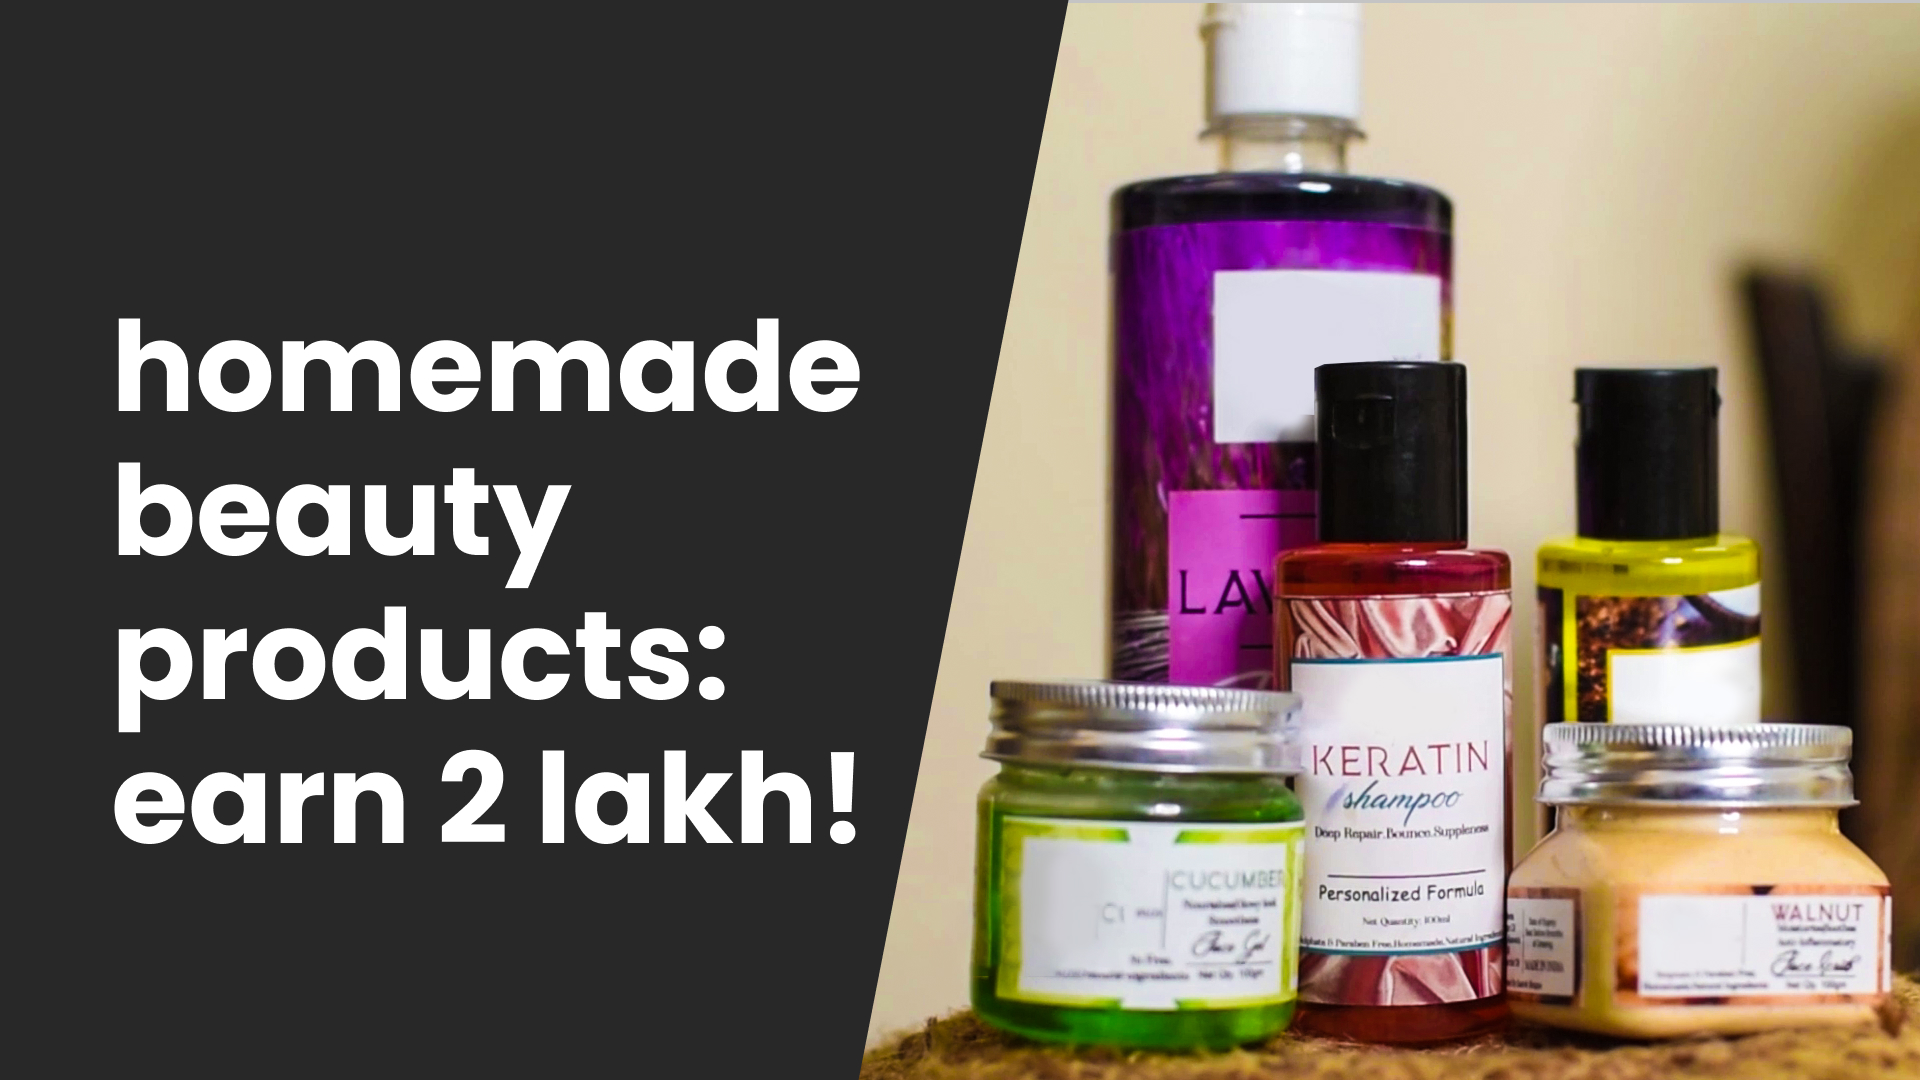 Course Trailer: Home Made Beauty Products-Earn over 80K per month. Watch to know more.